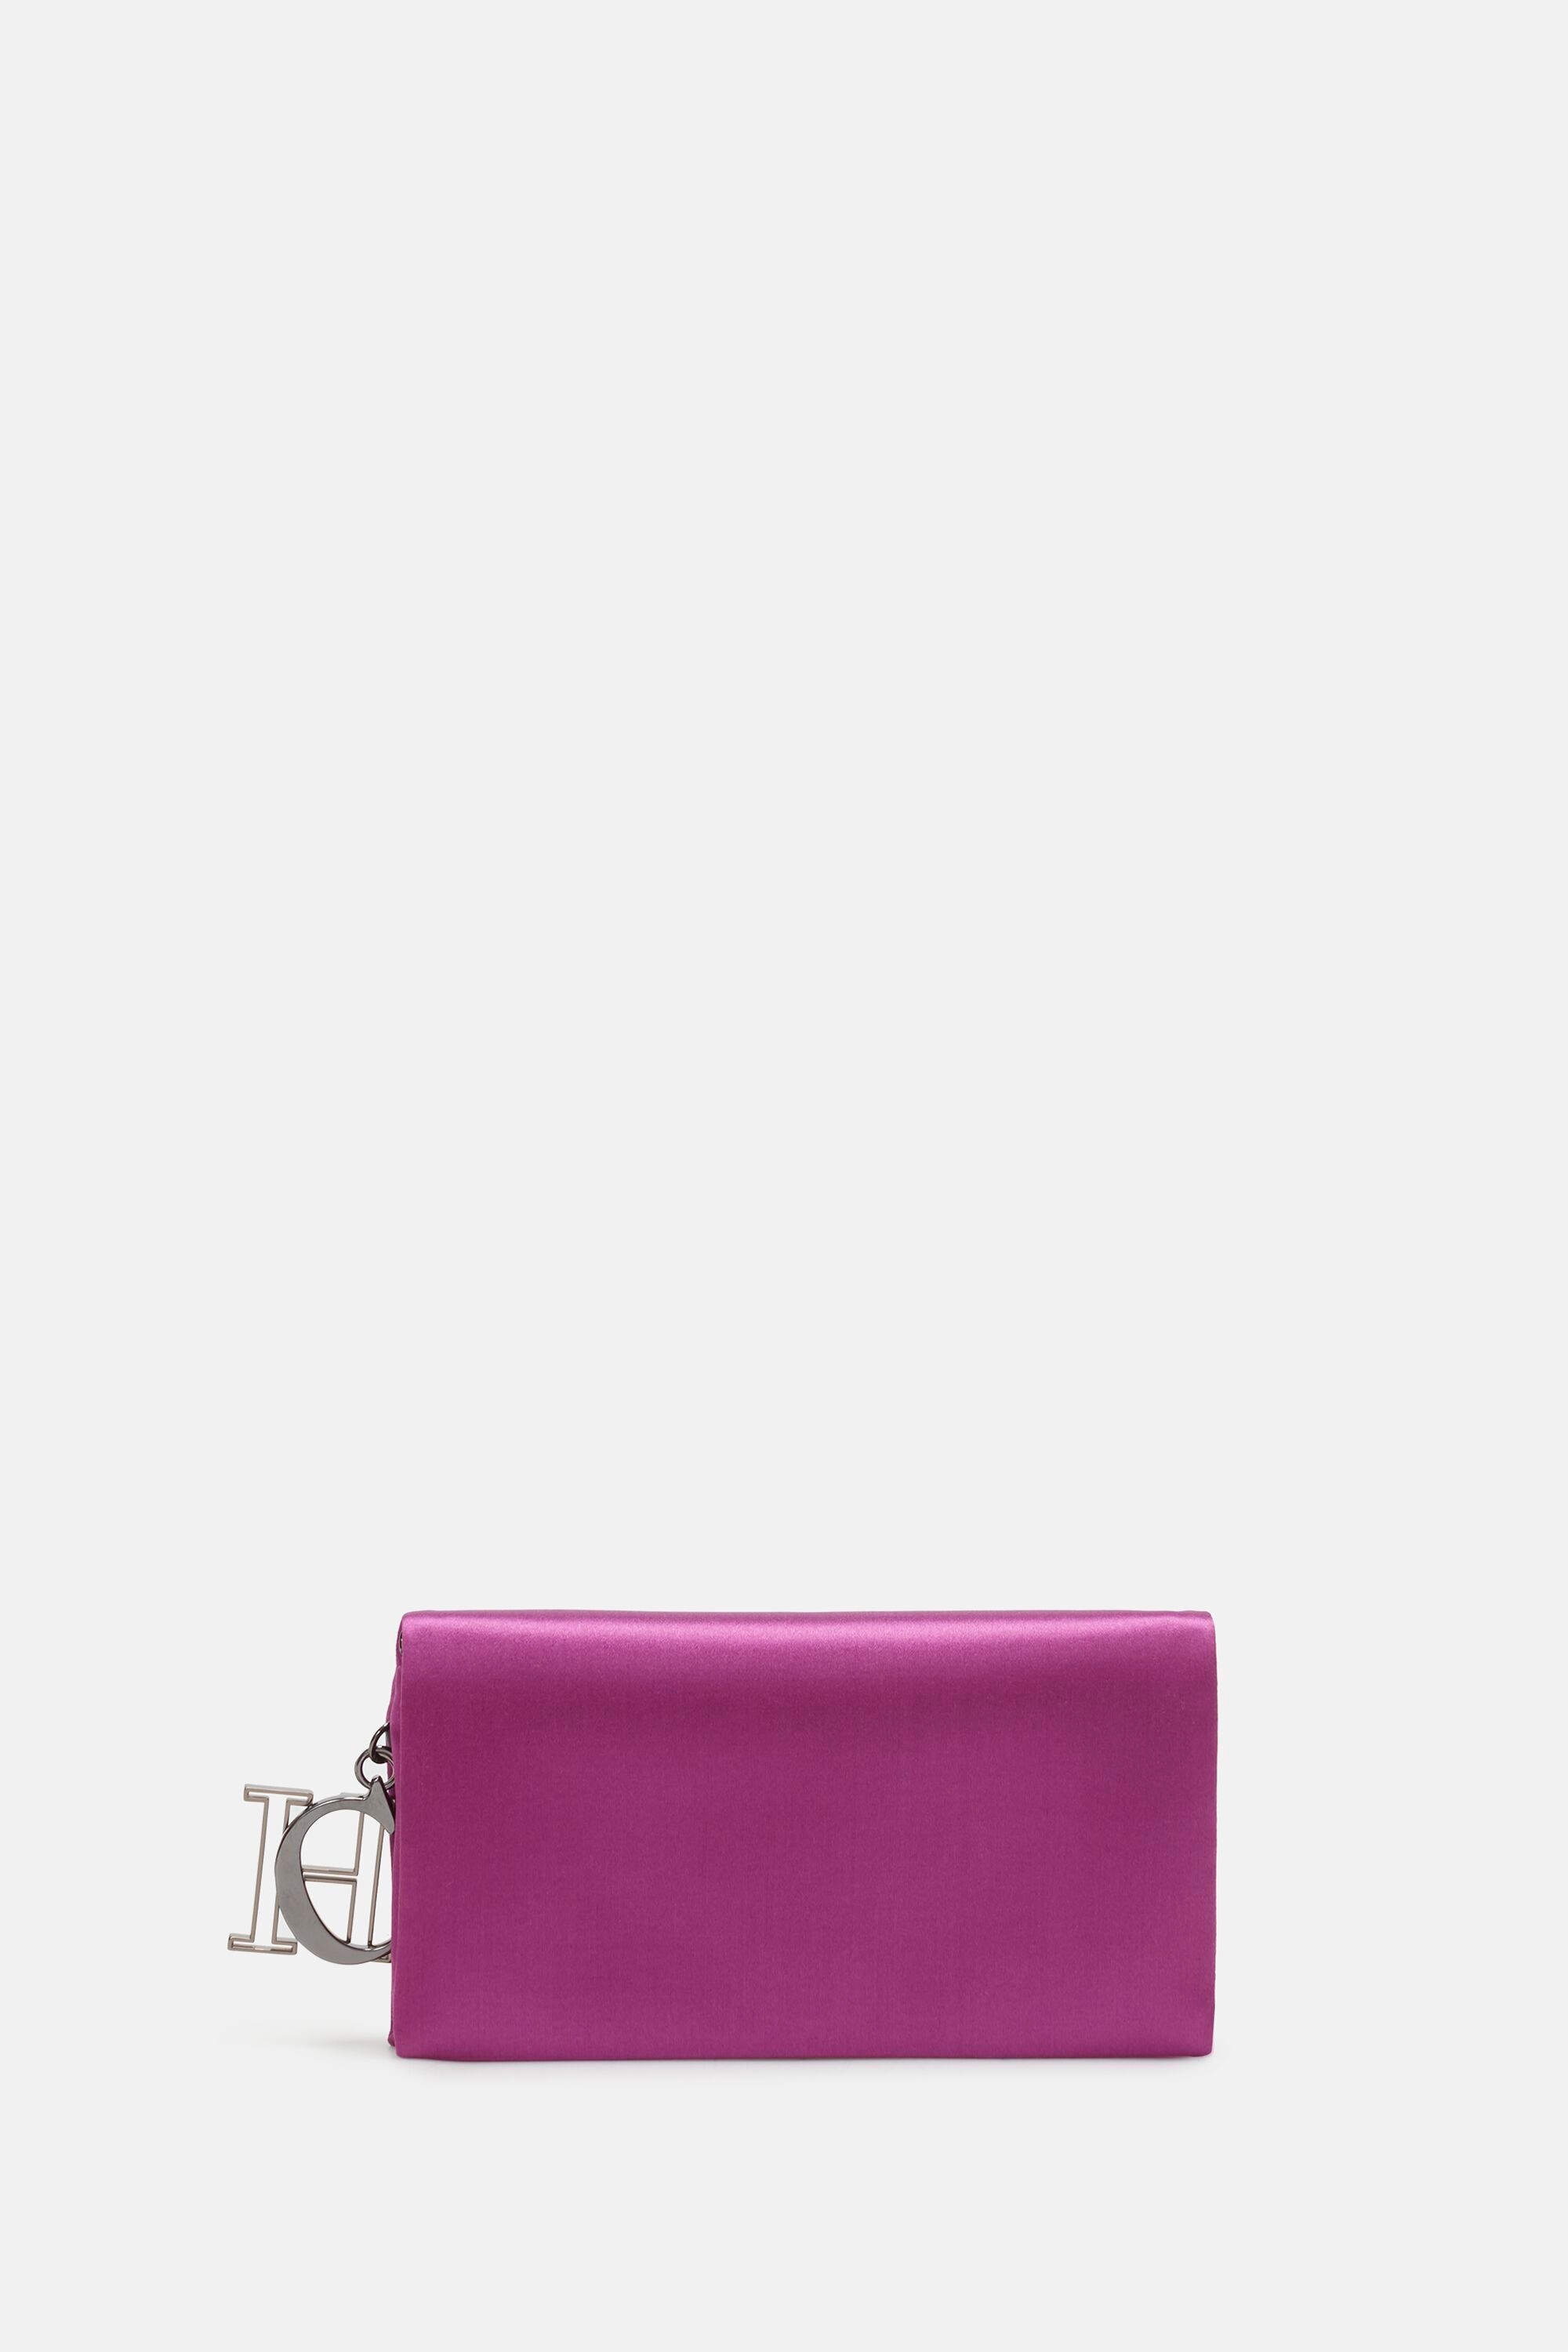 Marquise | Small clutch